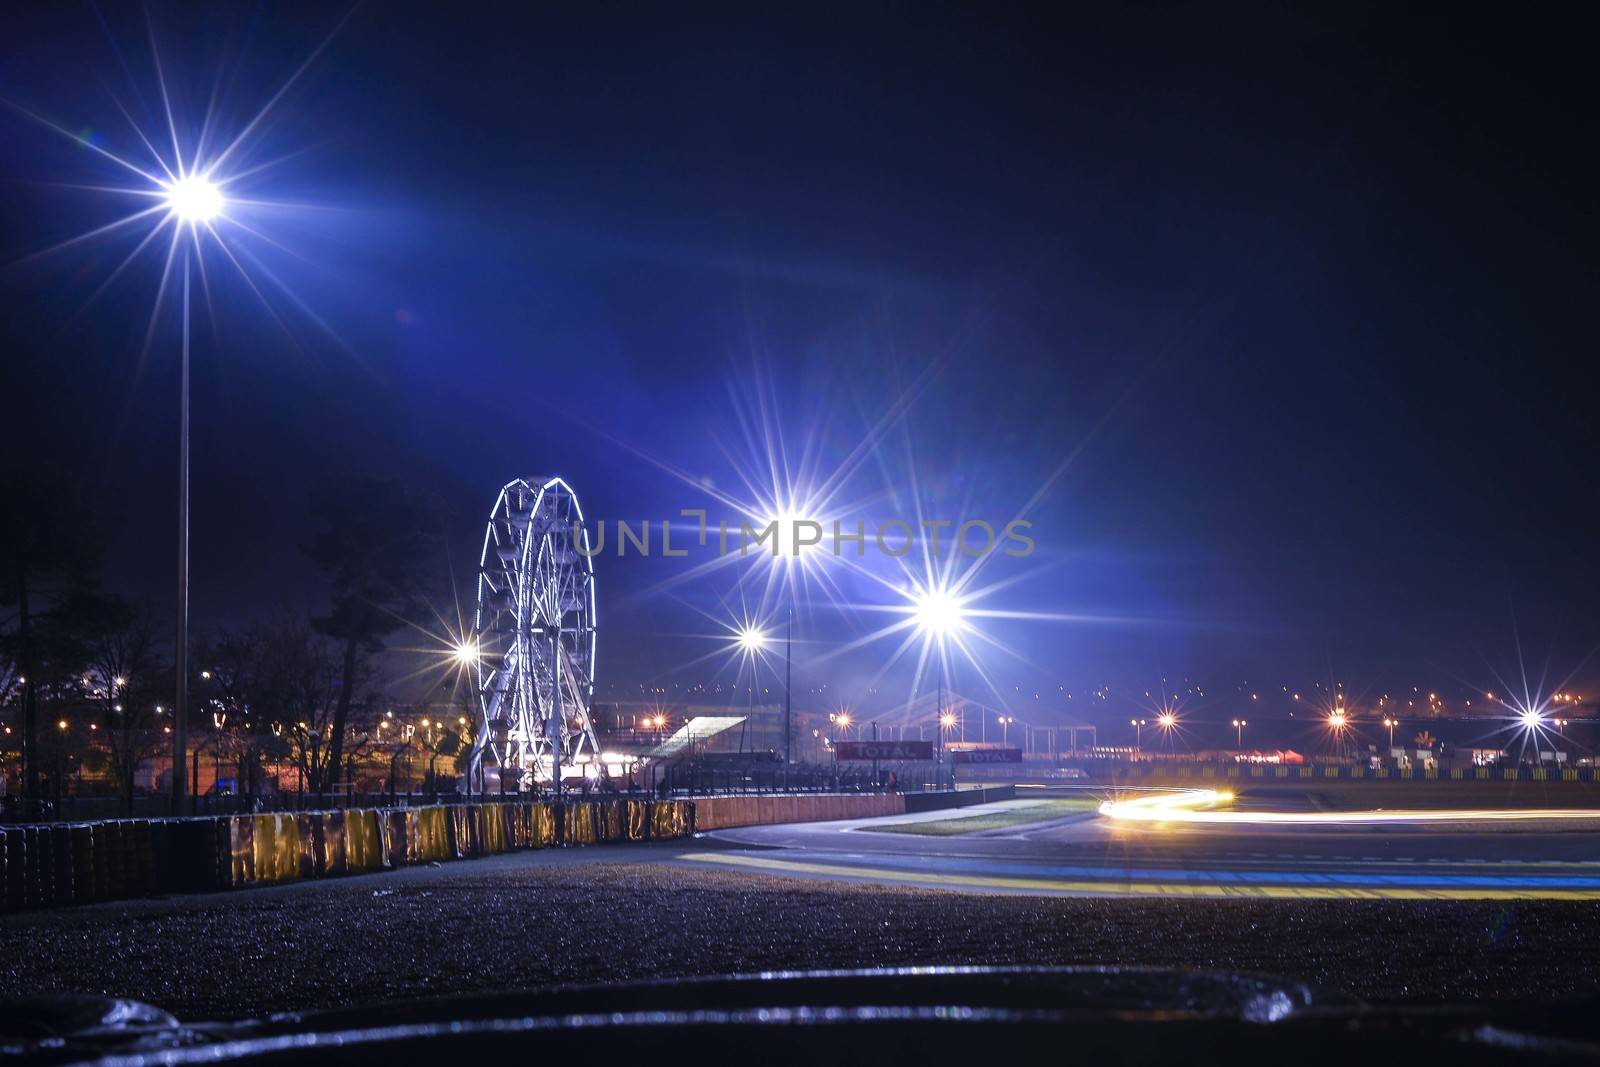 FRANCE, Le Mans: Bugatti track is pictured at night during the 39th edition of Le Mans 24 Hours moto endurance race in Le Mans, France, on April 9, 2016.